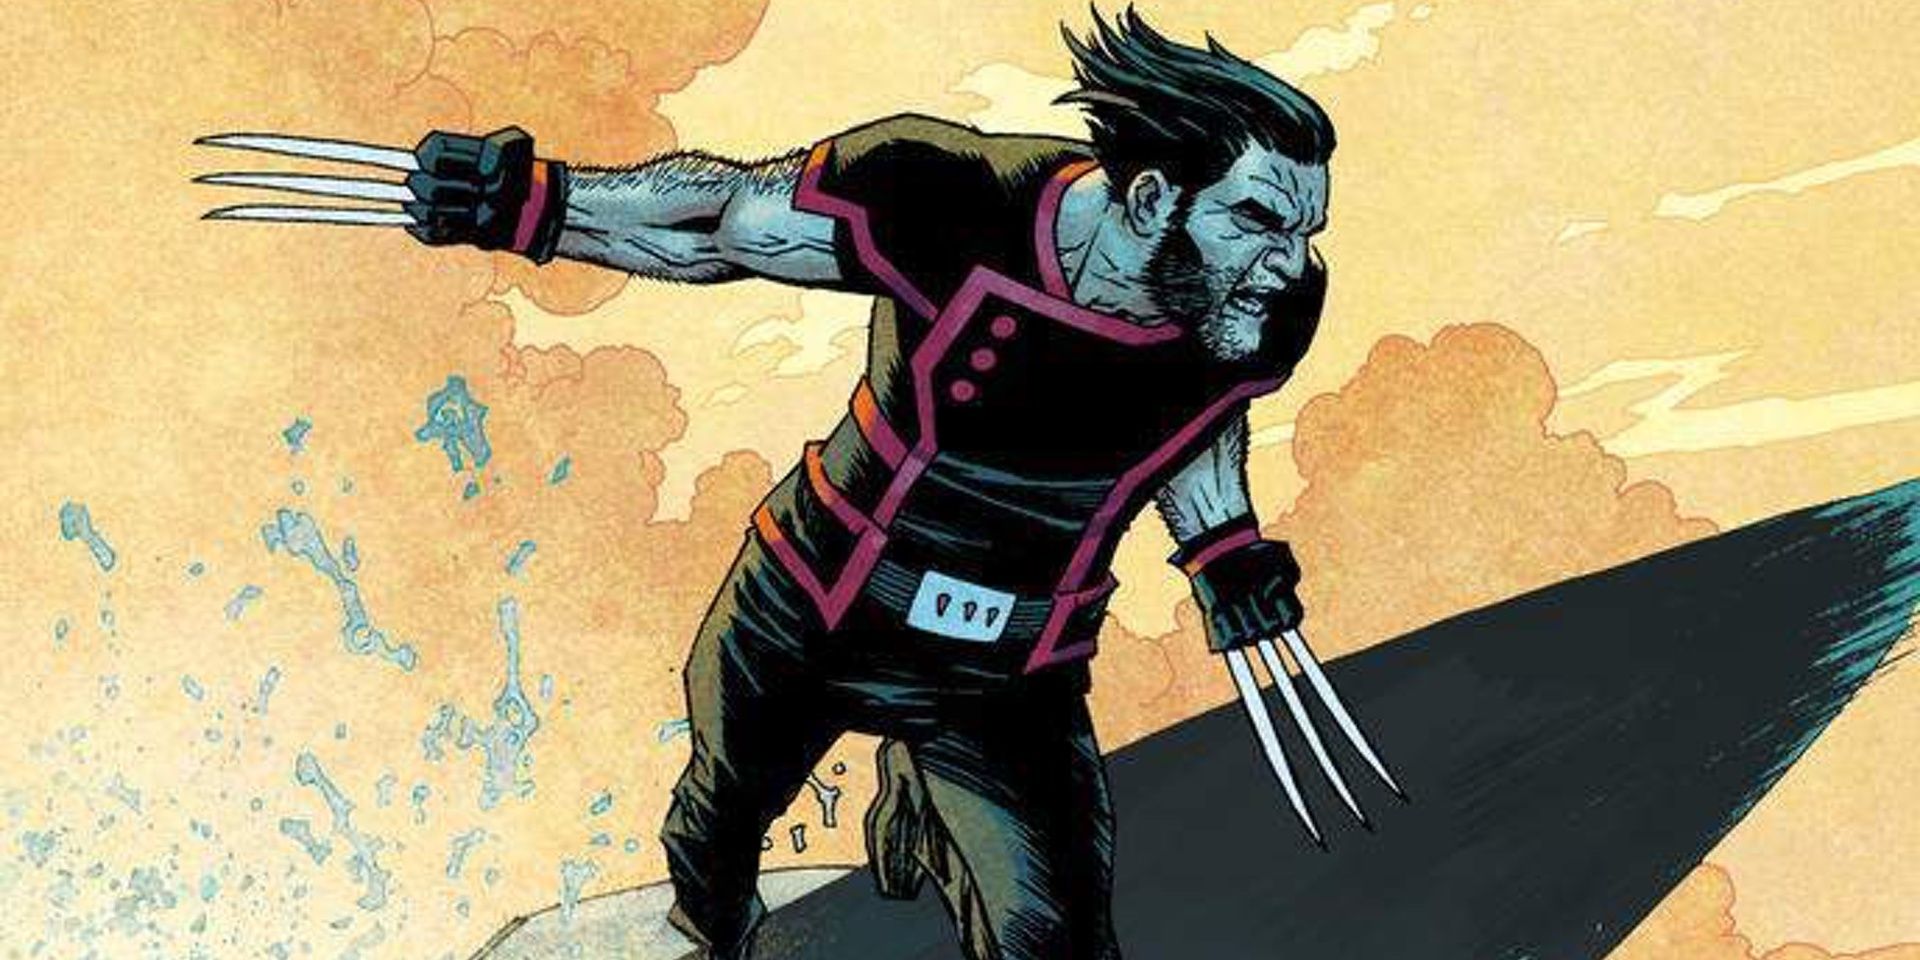 Marvel Comics' Wolverine jumping off a boat with his claws extended